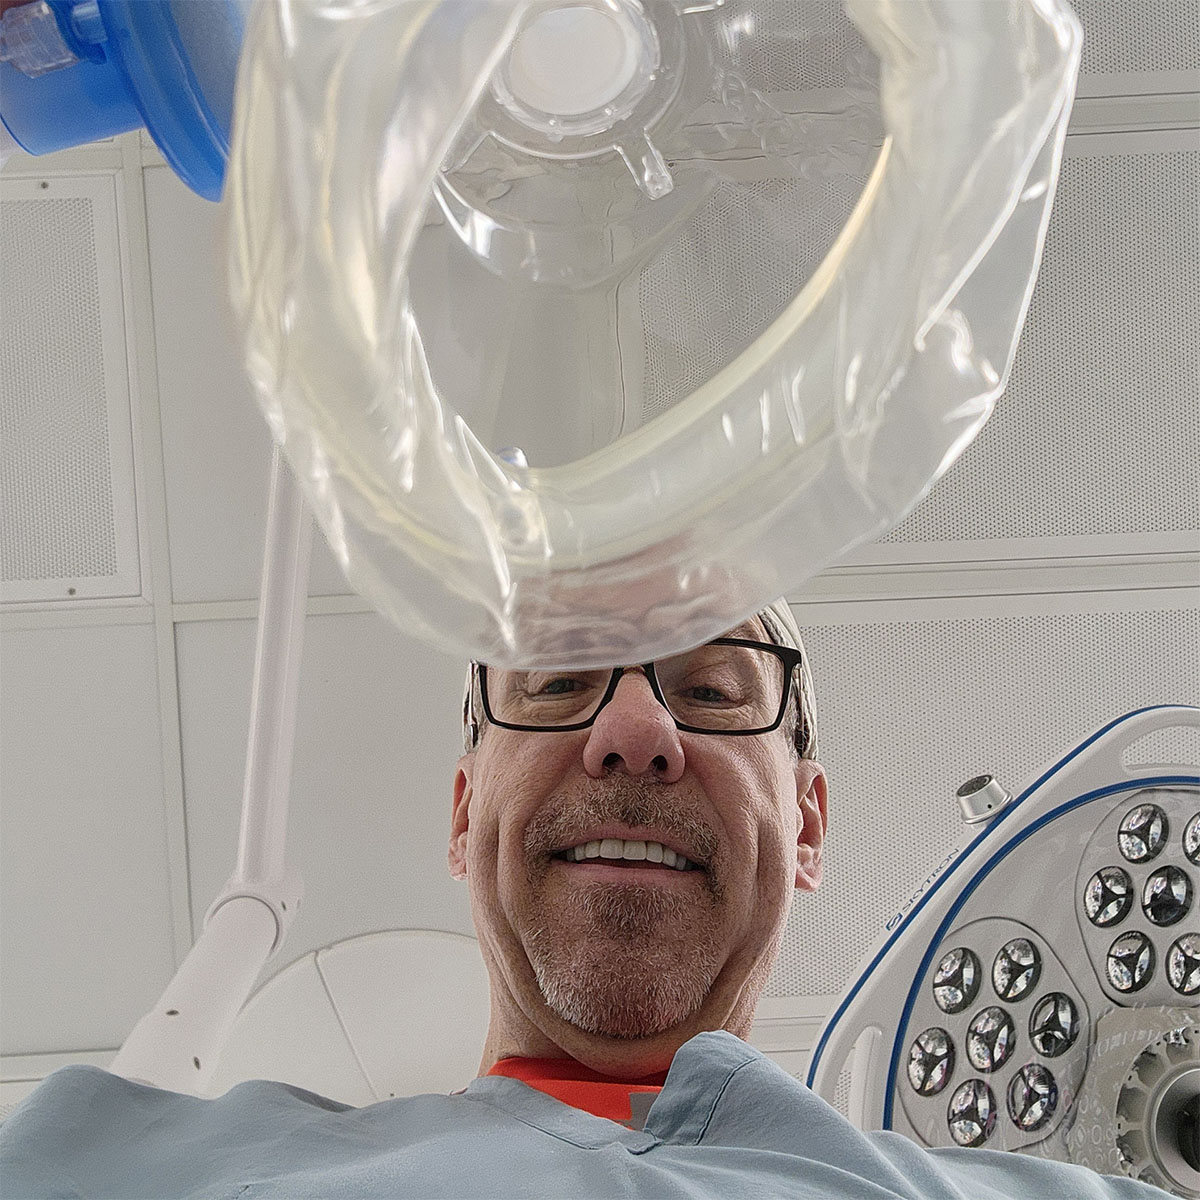 The last thing a patient sees before going to sleep